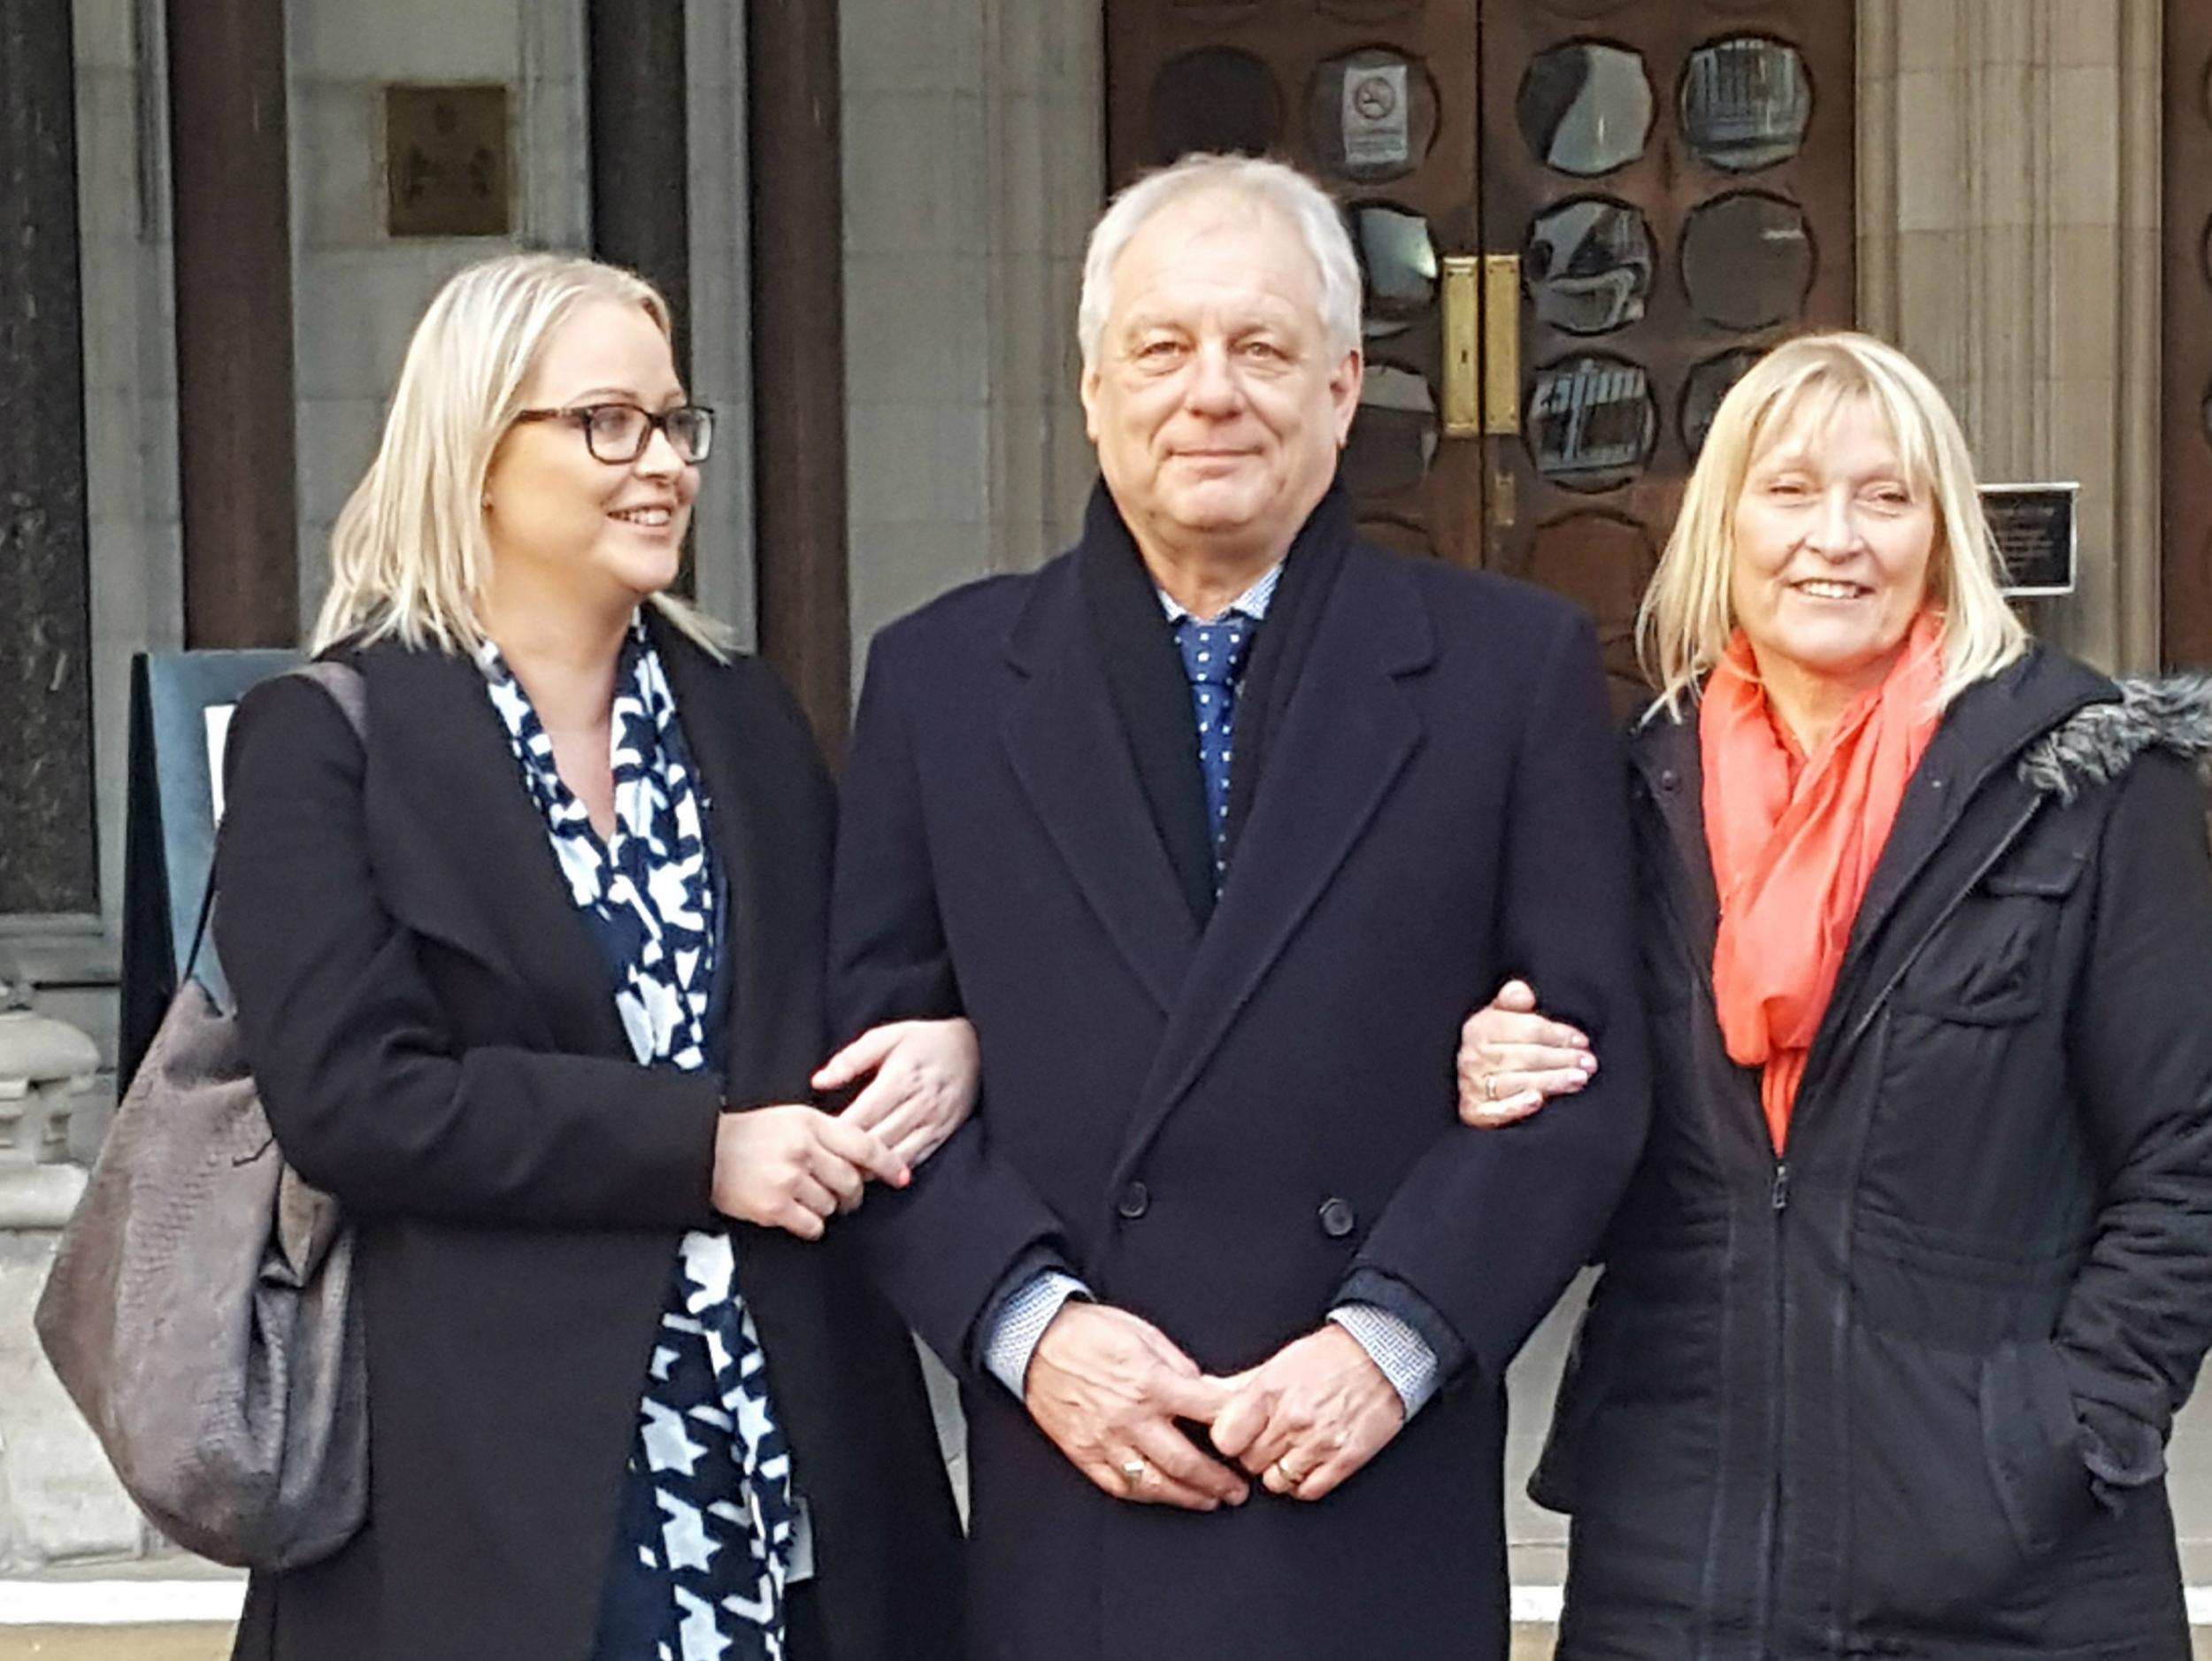 Stephen Simmons conviction for theft was overturned by the Court of Appeal 43 years after he served eight months in a youth offenders institute